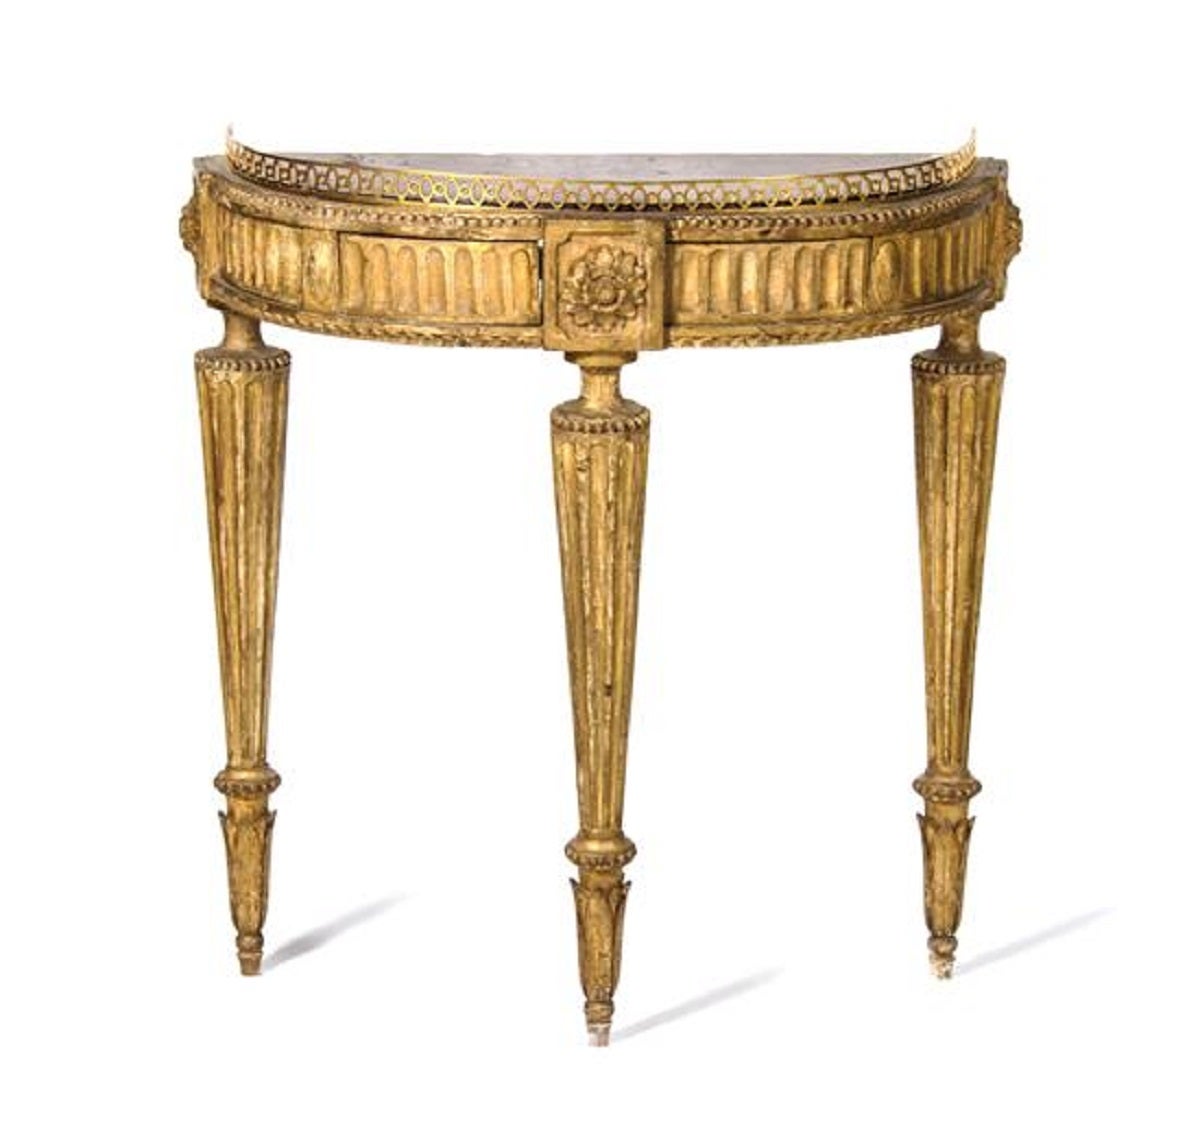 Swedish Painted Console Table having a demilune marble-inset galleried top above a fluted frieze, raised on fluted tapering legs, 18th Century